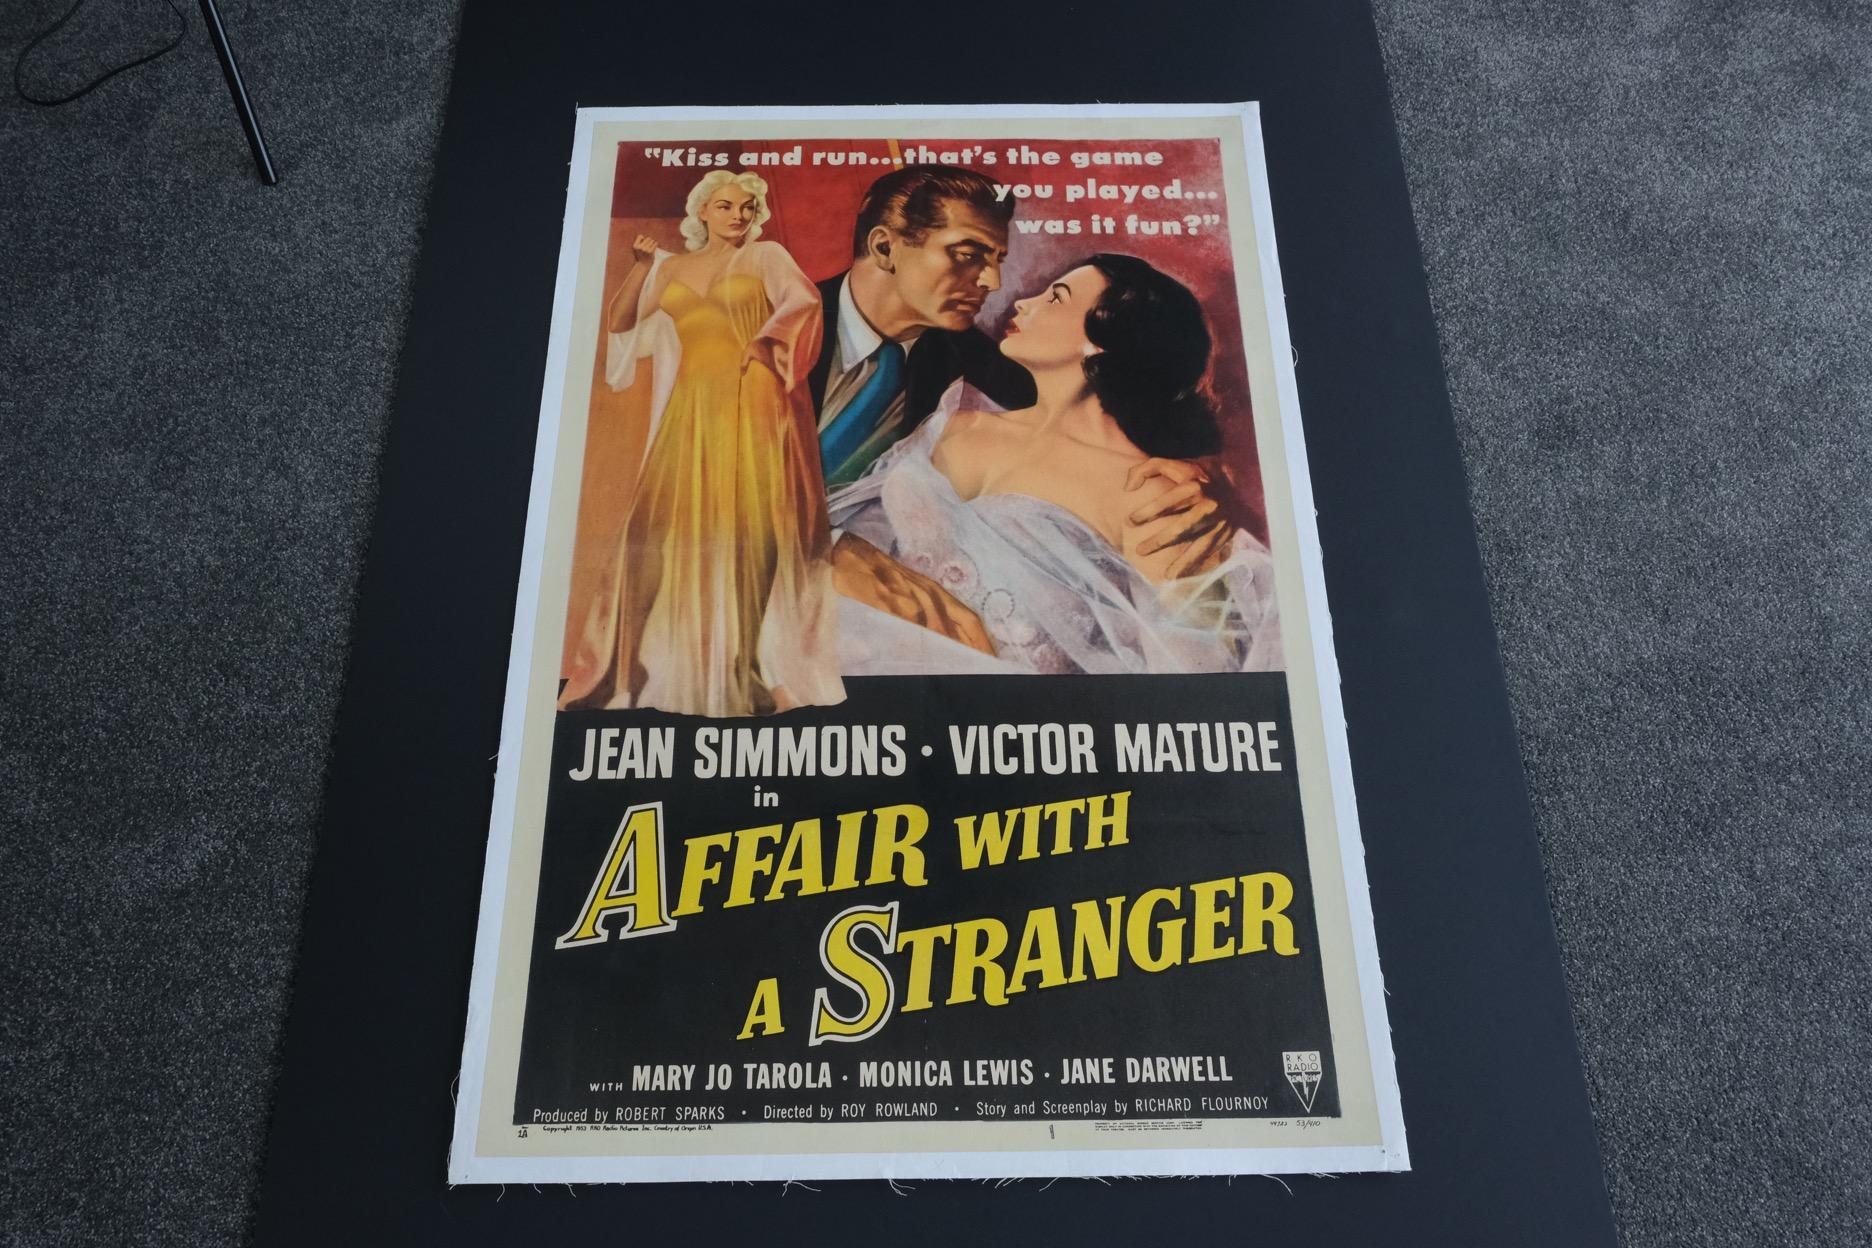 Size: one sheet

Condition: very fine

Dimensions: 1150mm x 780mm (inc. Linen Border)

Type: original lithographic print - linen backed

Year: 1953

Details: A rare original poster for the film ‘Affair With A Stranger’. This poster looks